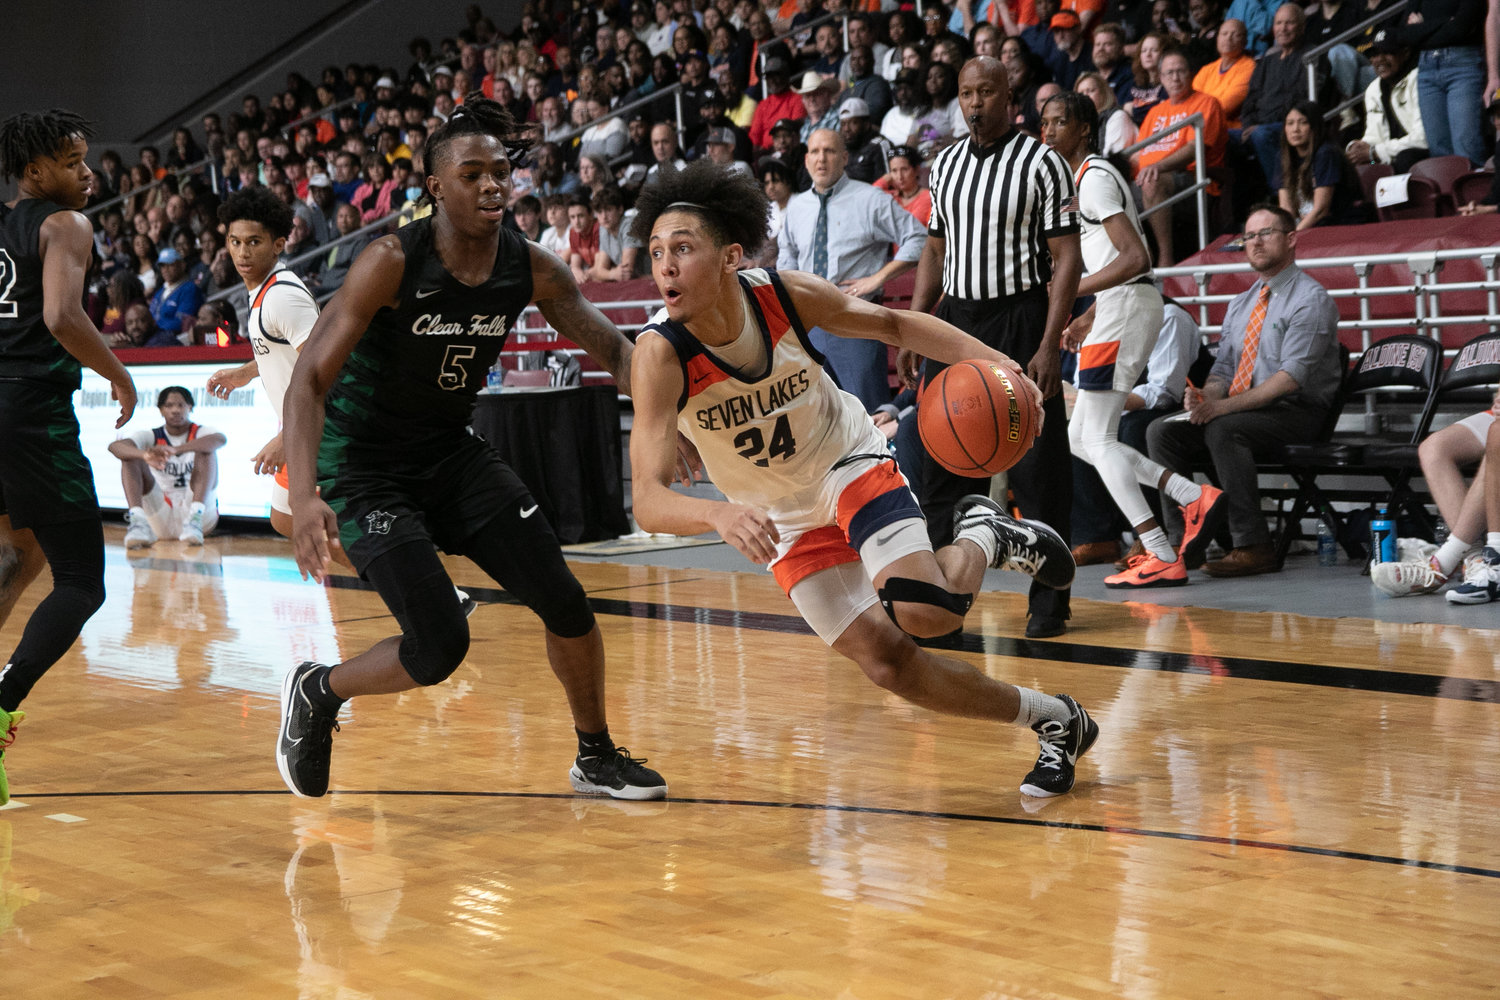 AJ Bates gets past a defender during a Class 6A Regional Semifinal between Seven Lakes and Clear Falls at the M.O. Campbell Center in Aldine.